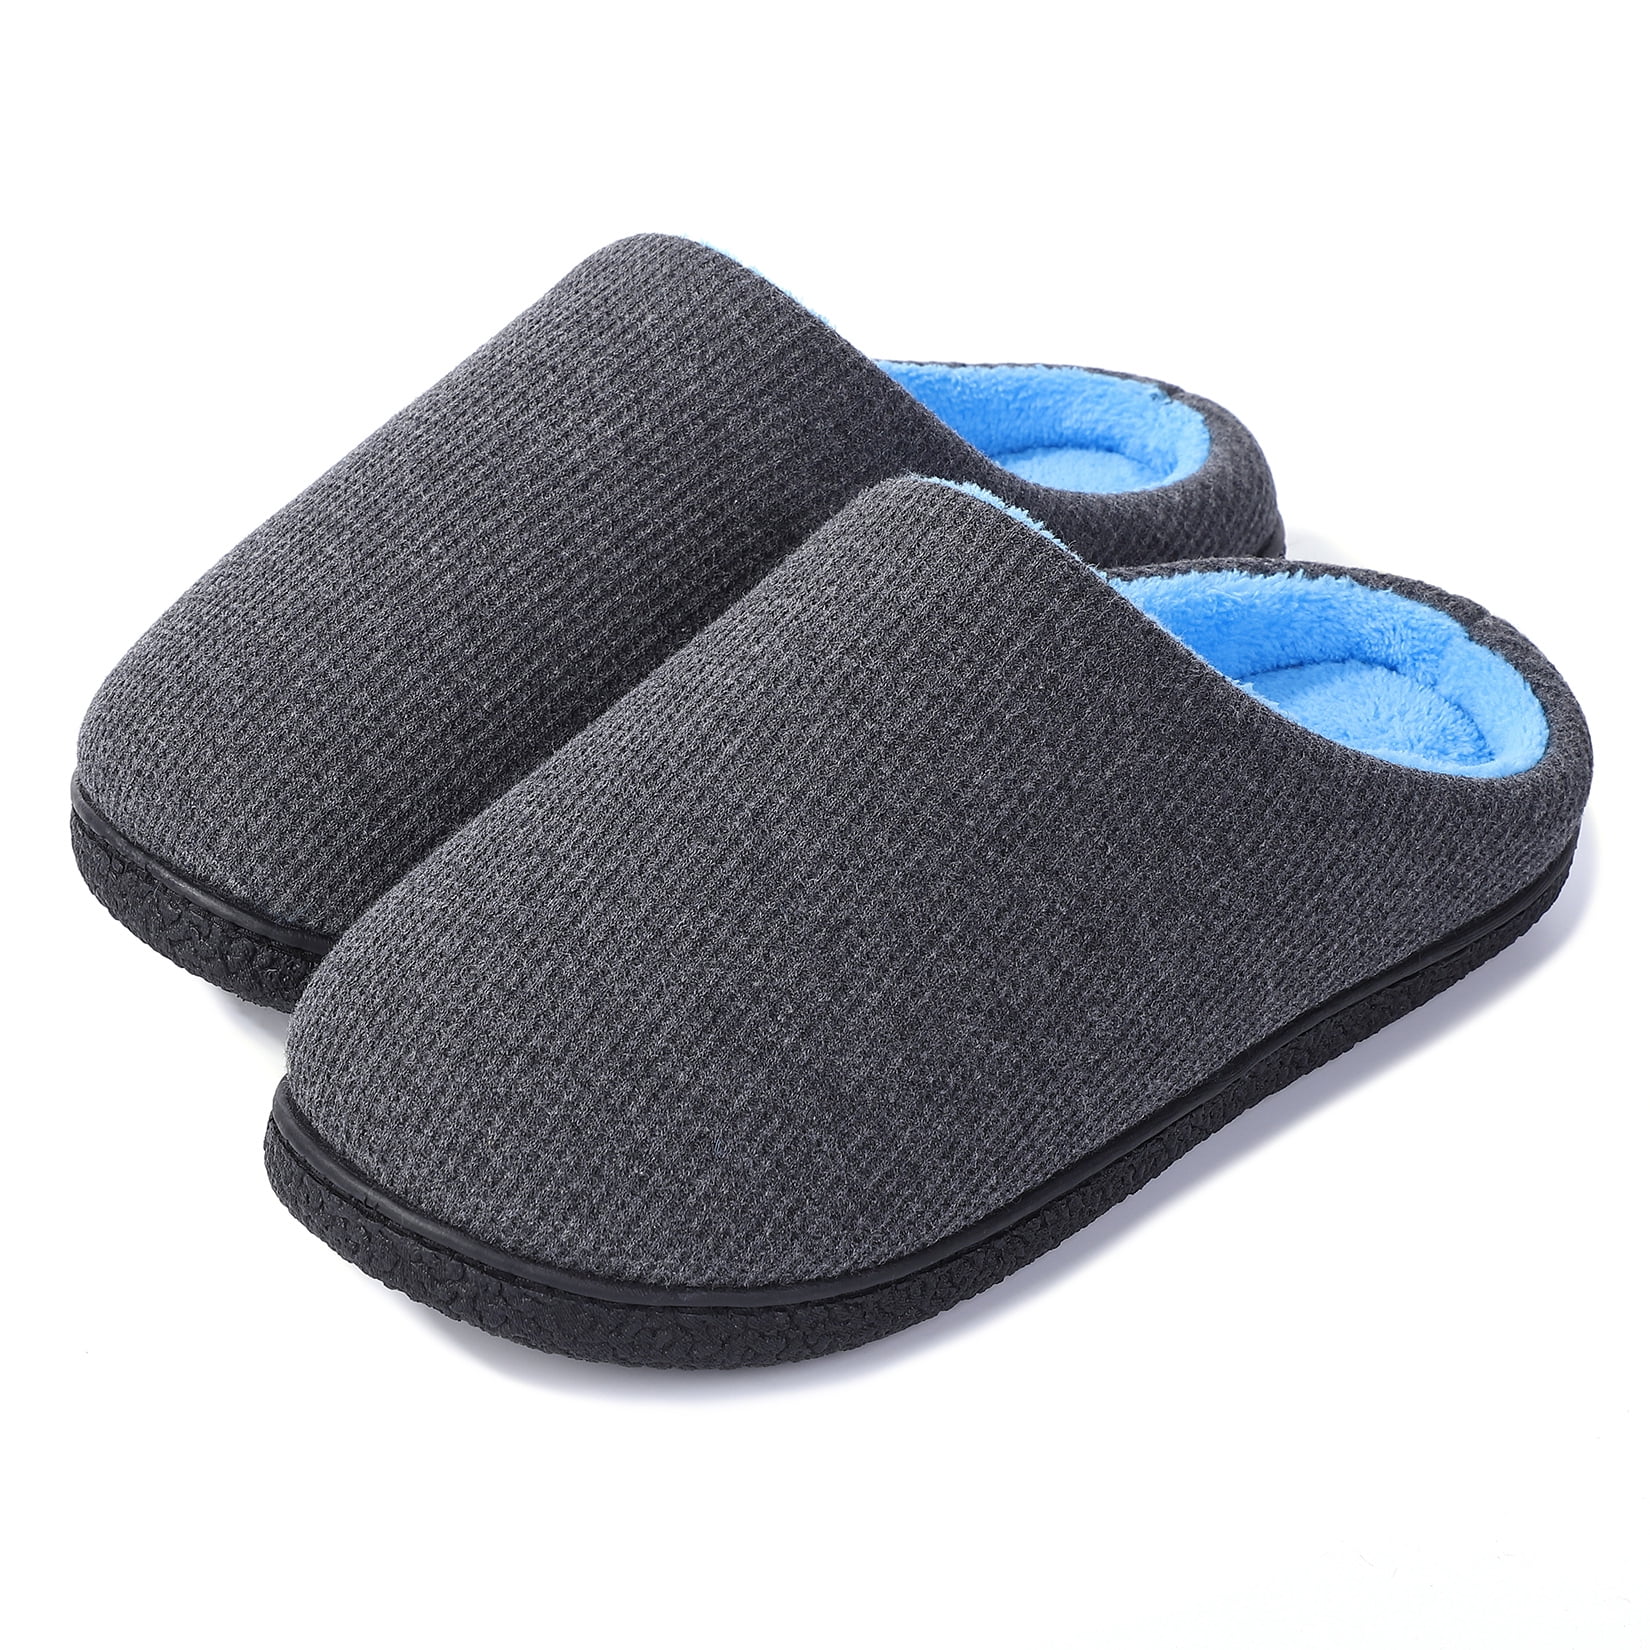 EastVita Slippers for Men and Womens Cozy Memory Foam Slippers Two-Tone ...